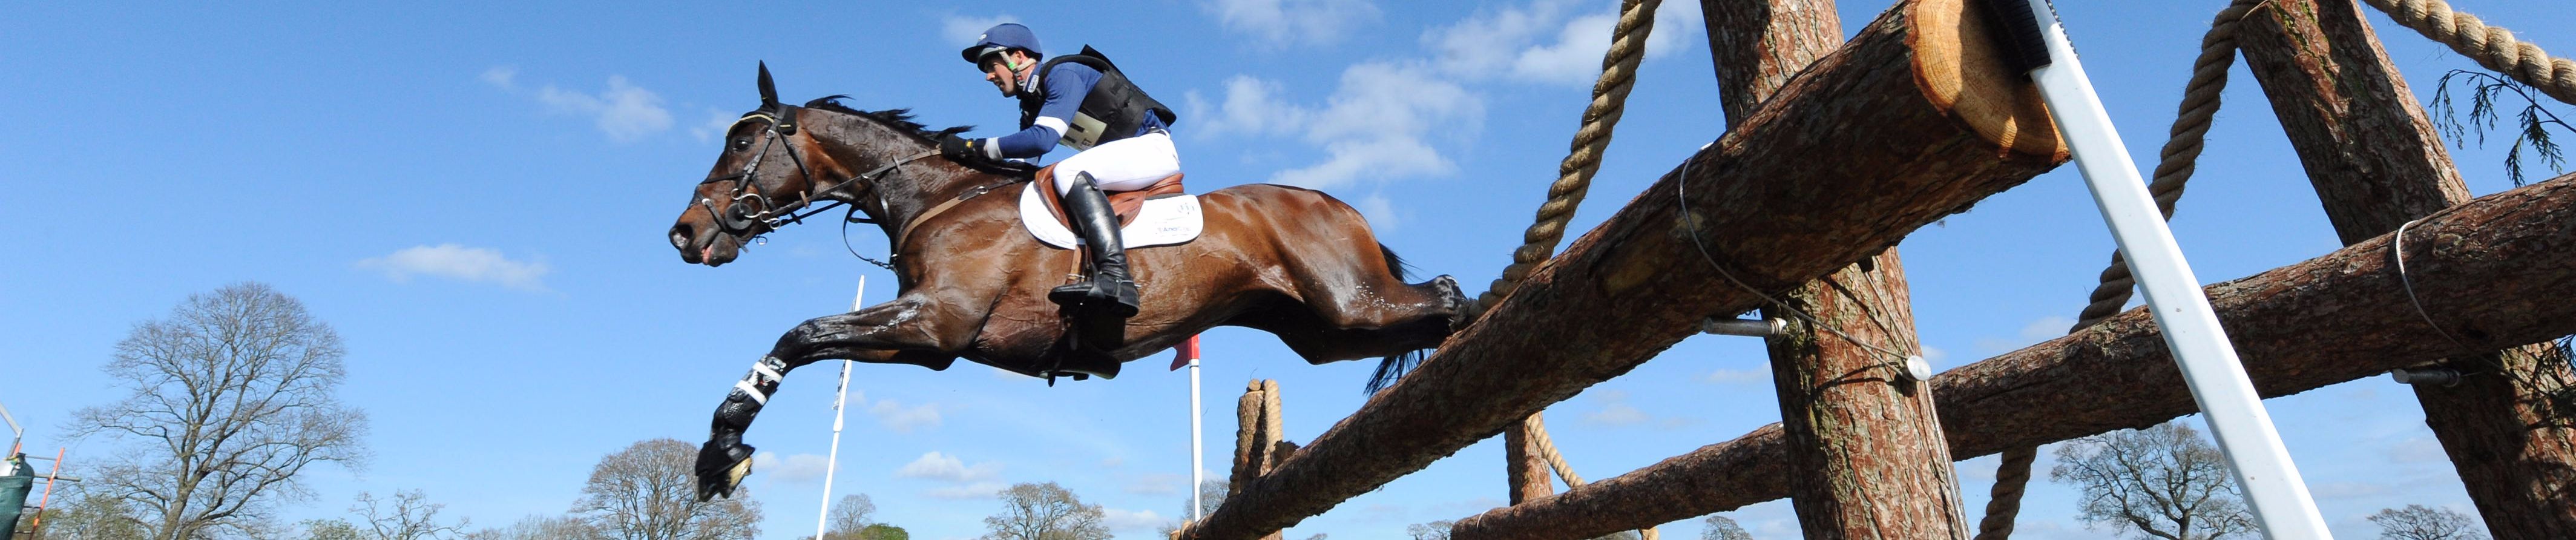 Stream Badminton Horse Trials Listen to podcast episodes online for free on SoundCloud